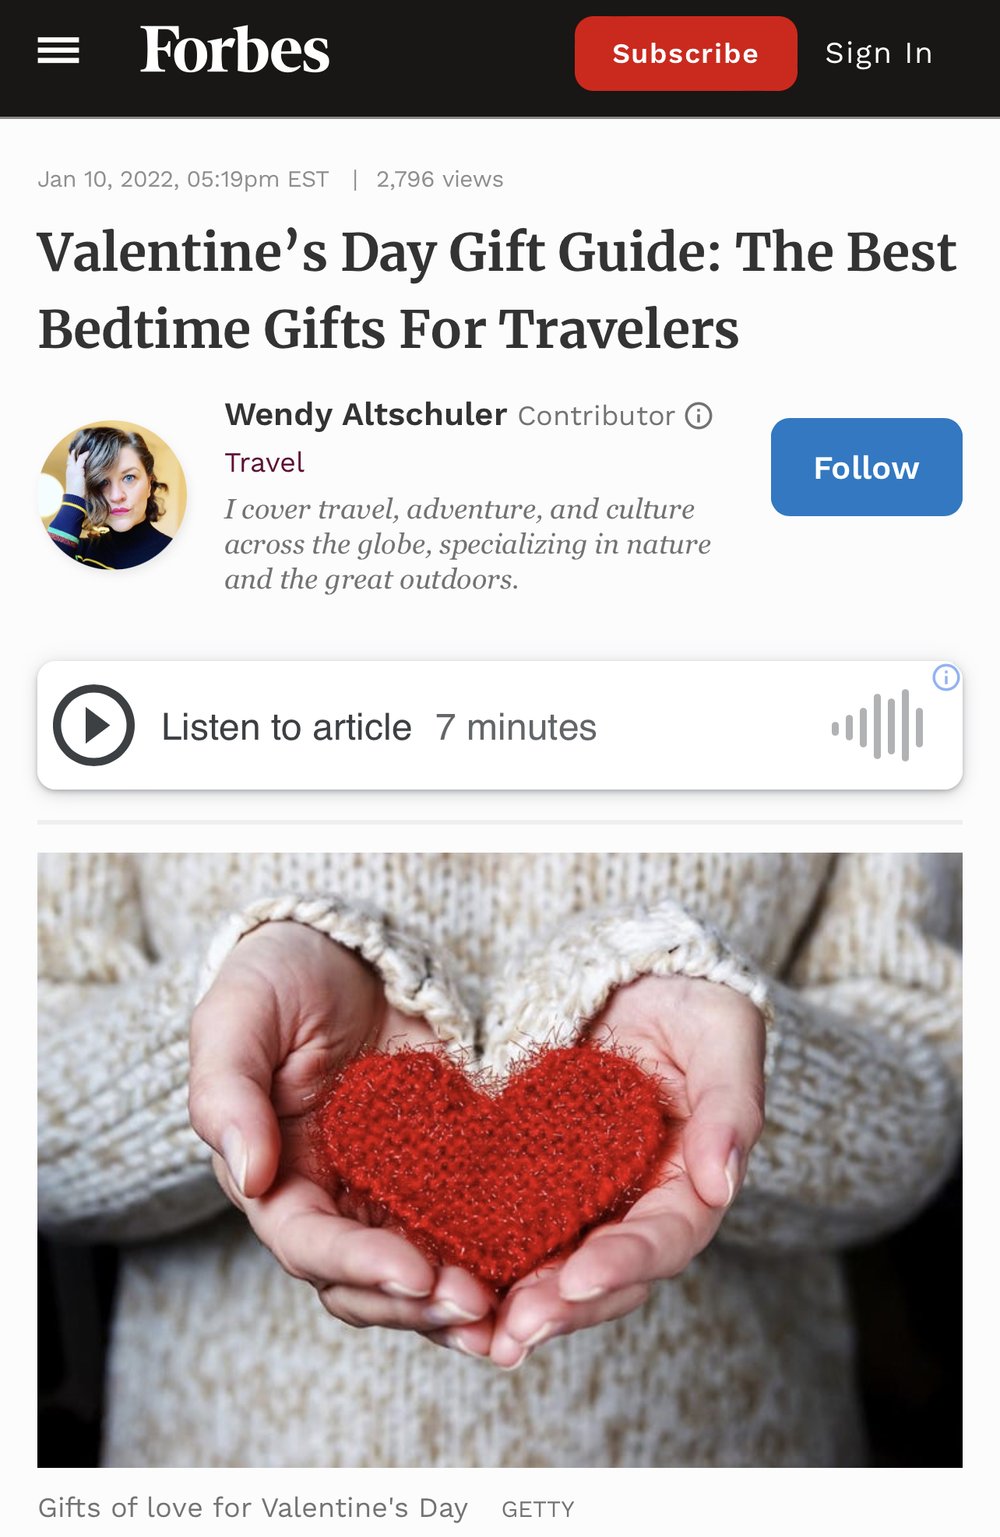 Valentine's Day Gift Guide: The Best Bedtime Gifts for Travelers